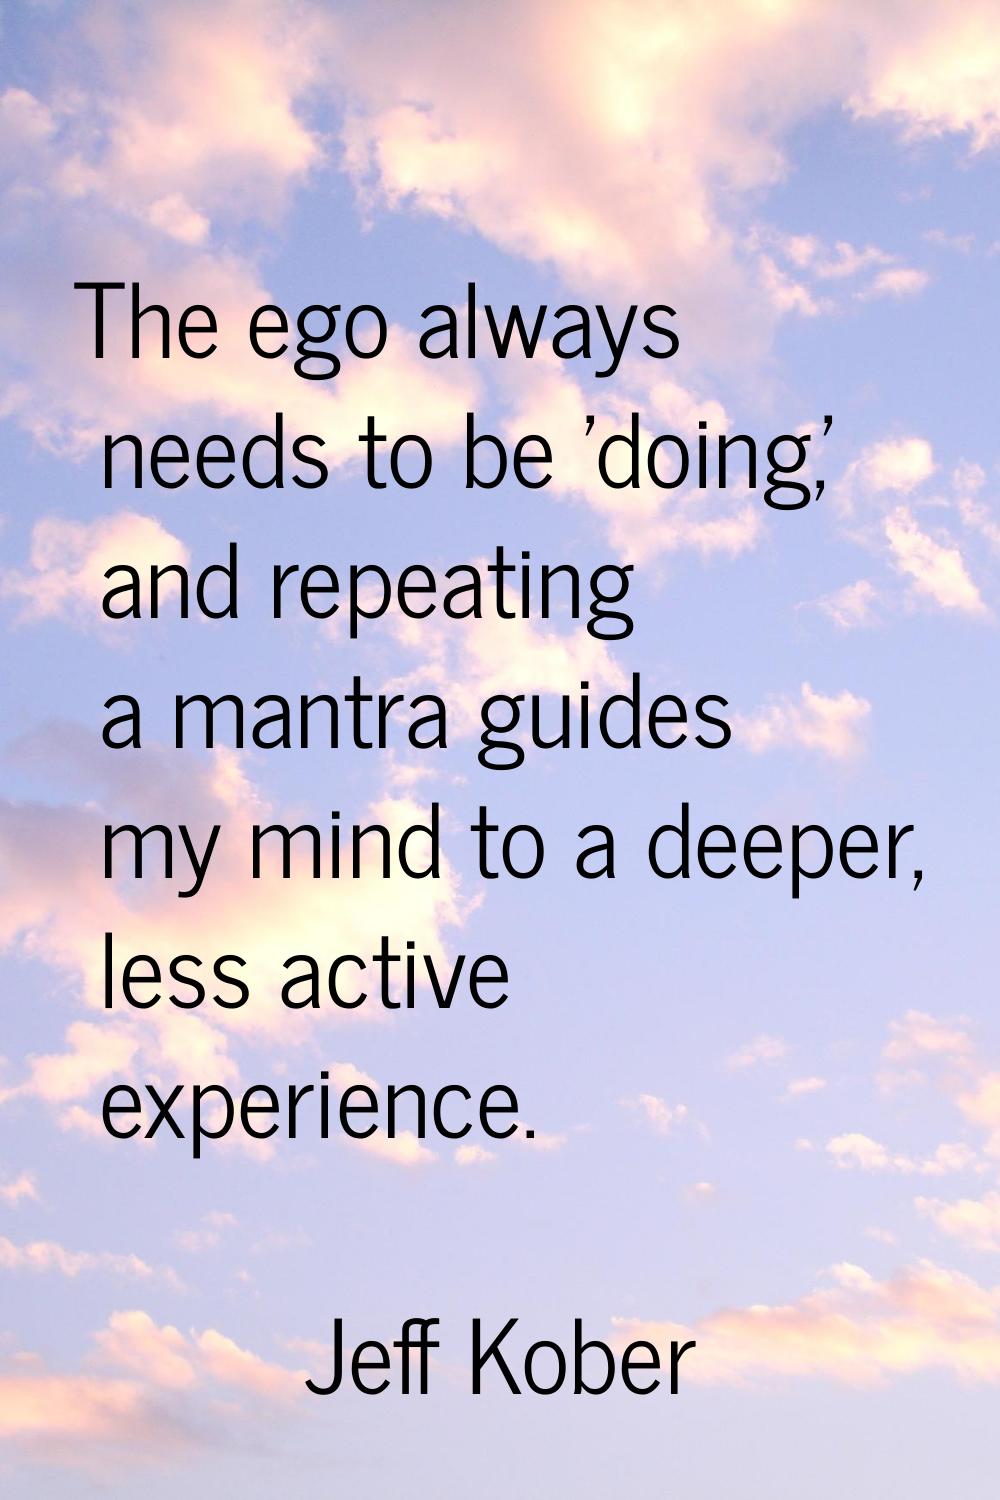 The ego always needs to be 'doing,' and repeating a mantra guides my mind to a deeper, less active 